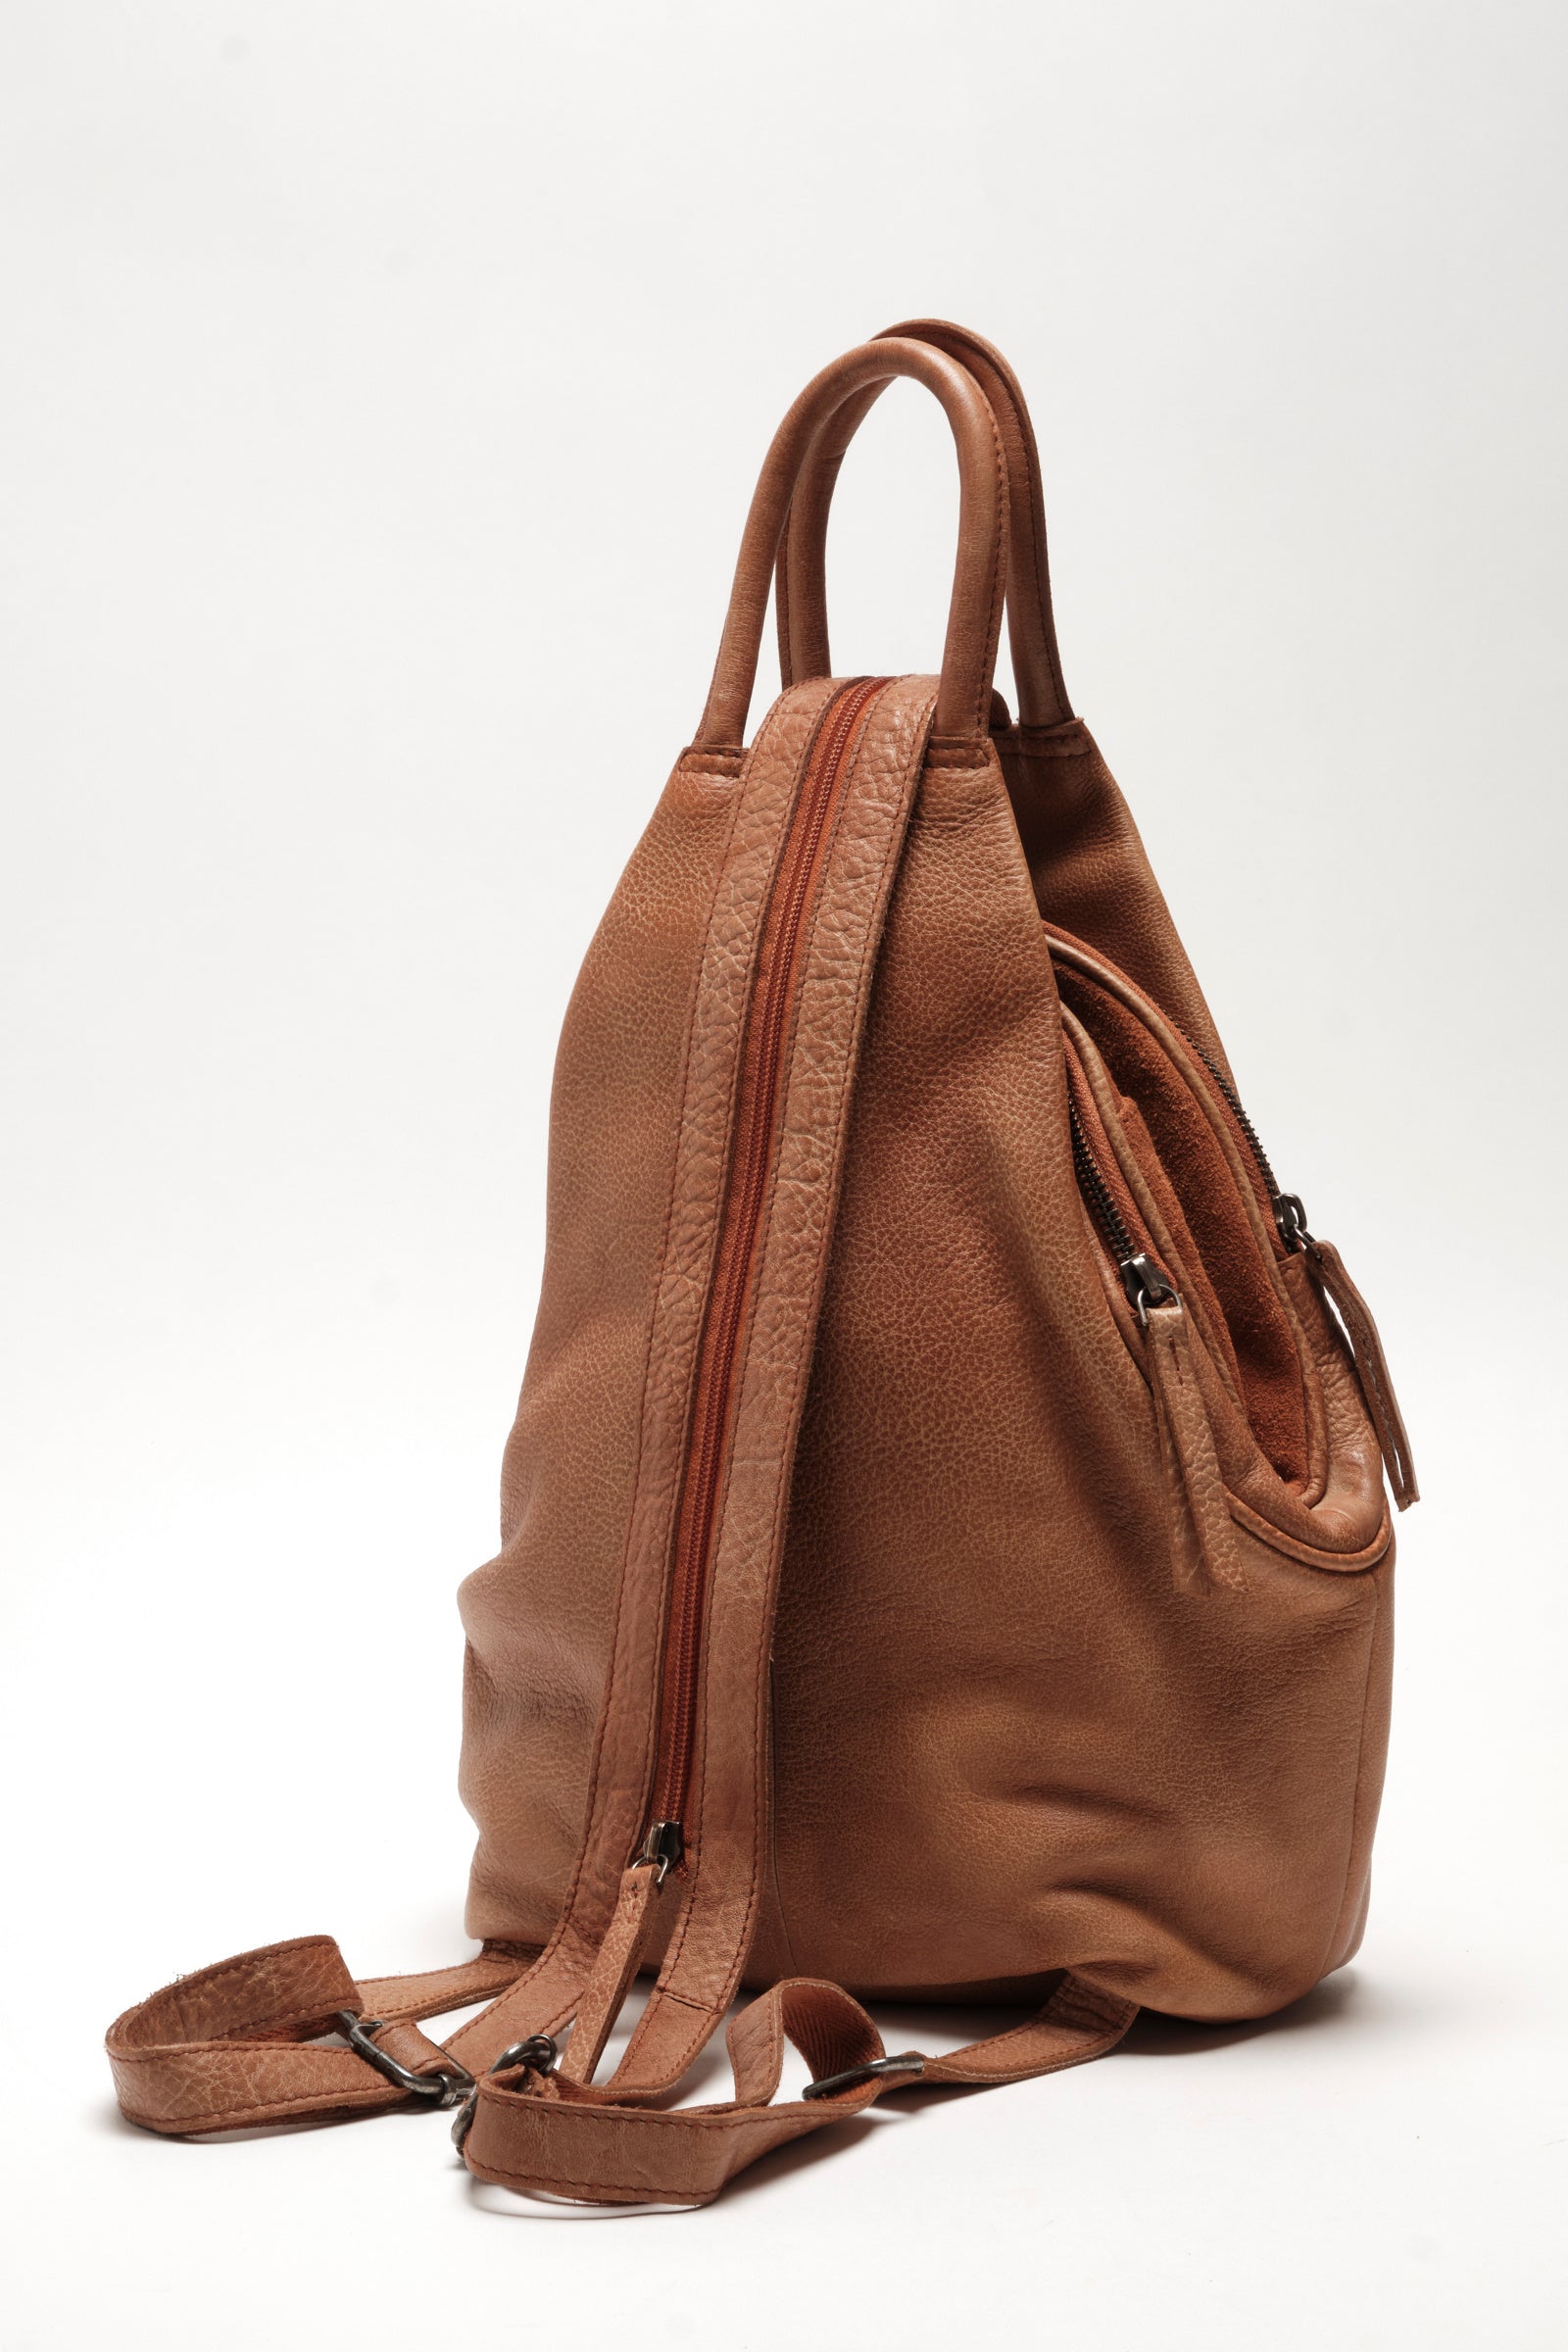 We The Free Soho Convertible Sling in Distressed Brown